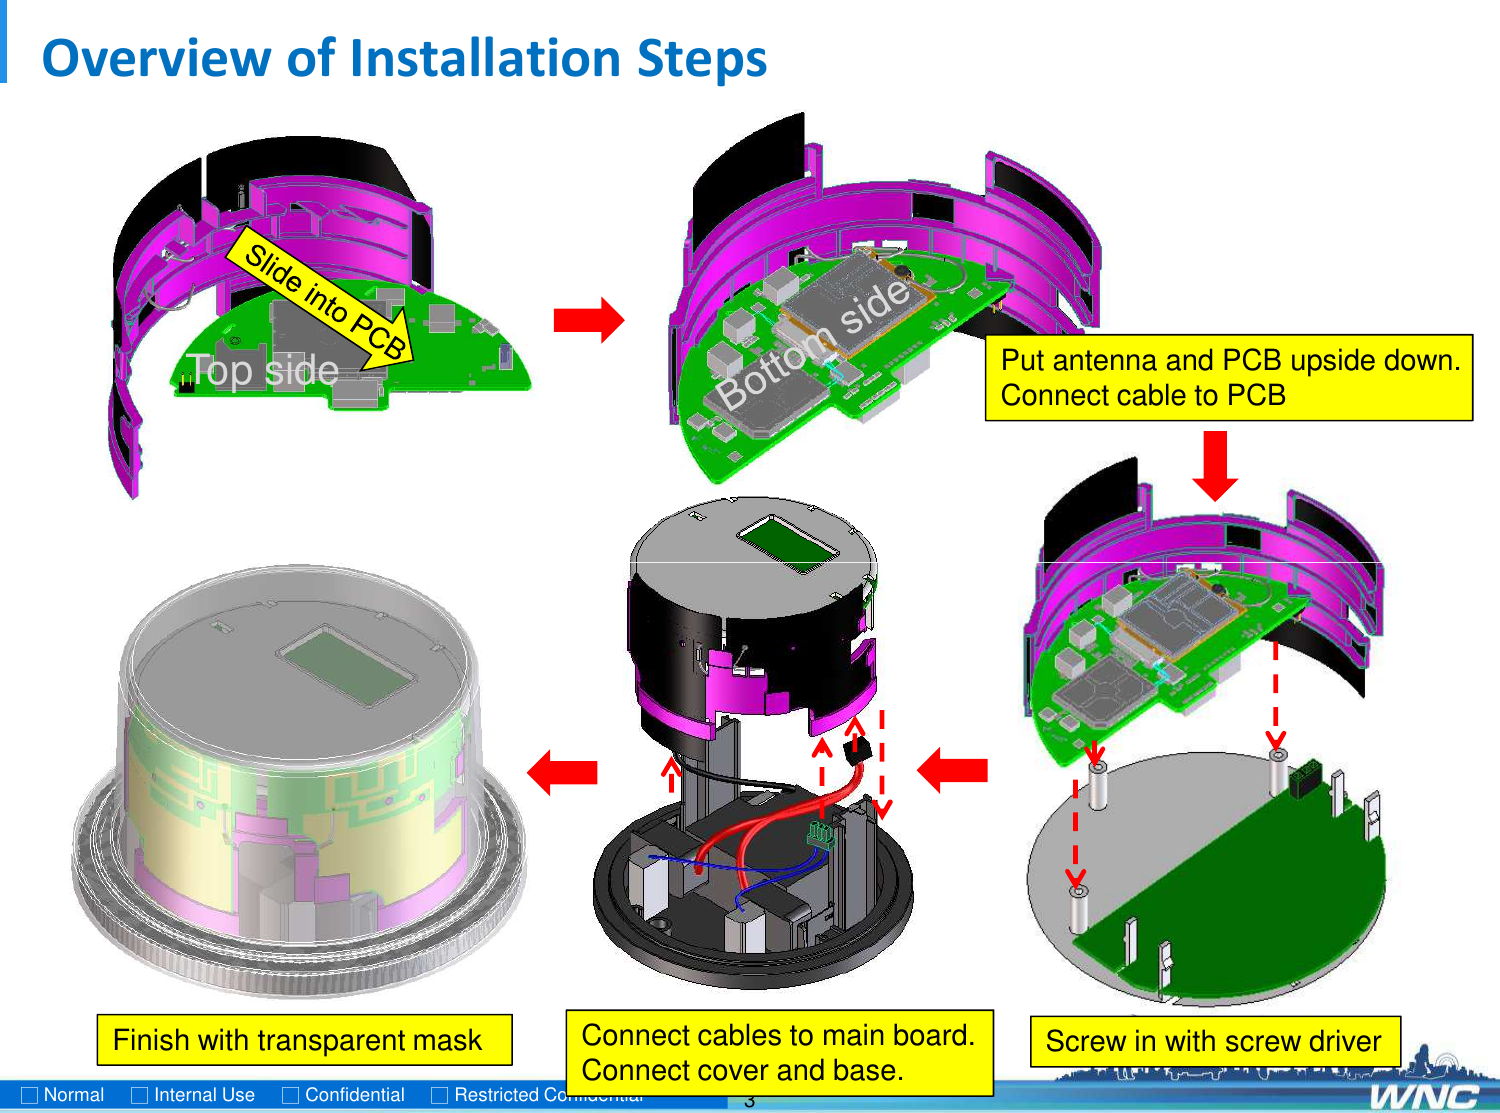 Overview of Installation StepsPut antenna and PCB upside down.Connect cable to PCBTop side3□Normal     □Internal Use  □Confidential  □Restricted ConfidentialScrew in with screw driverConnect cables to main board.Connect cover and base.Finish with transparent mask